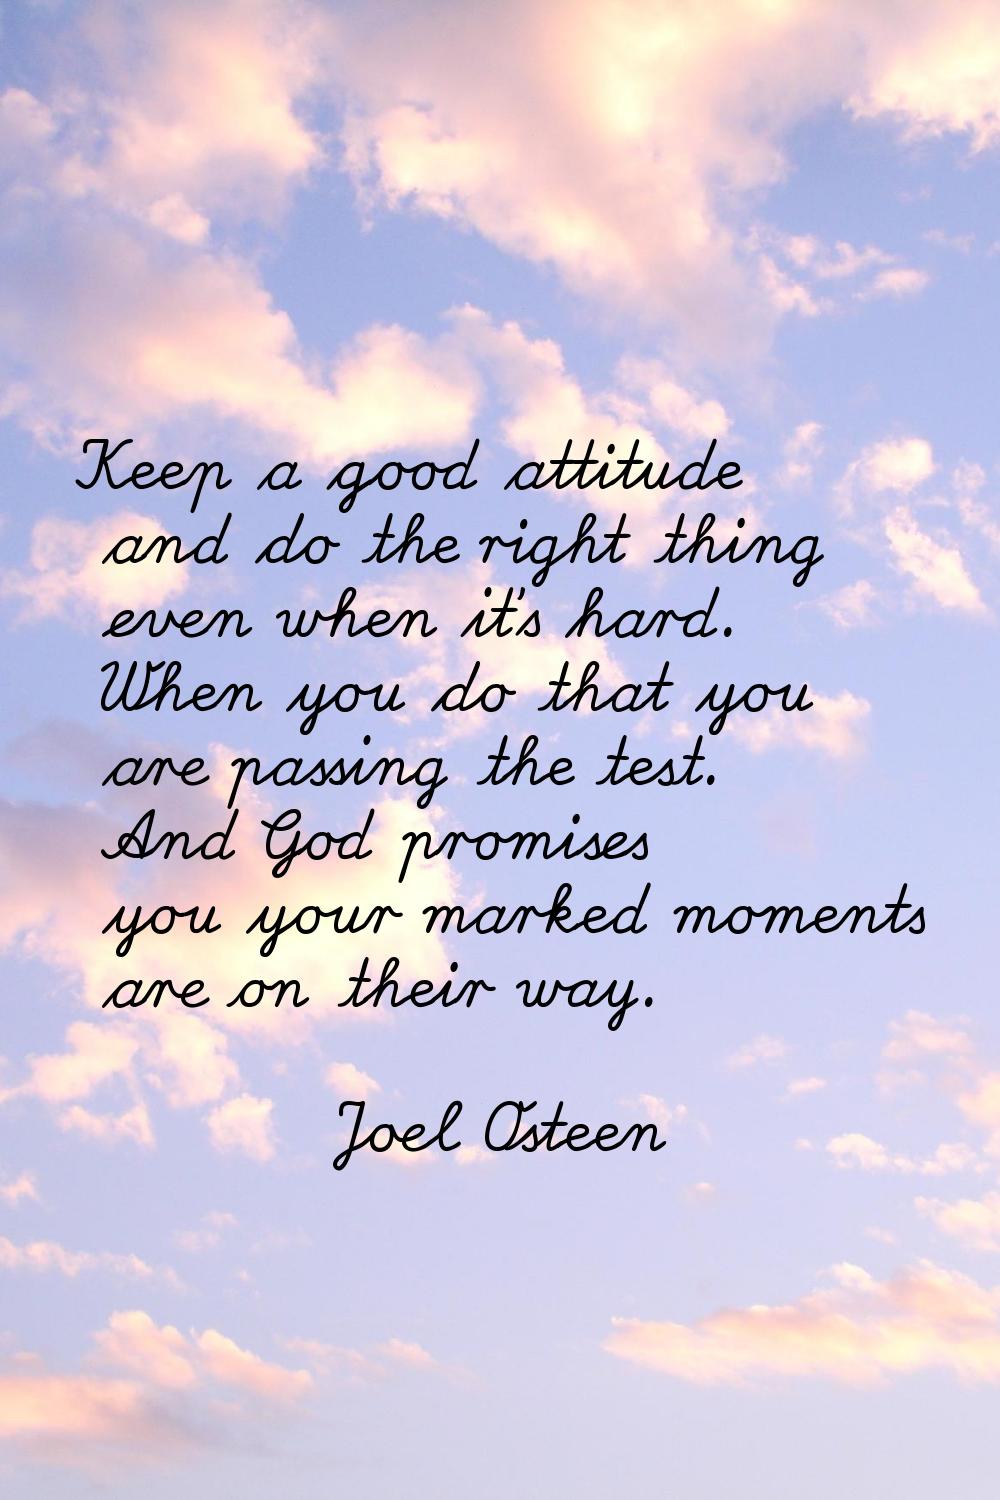 Keep a good attitude and do the right thing even when it's hard. When you do that you are passing t